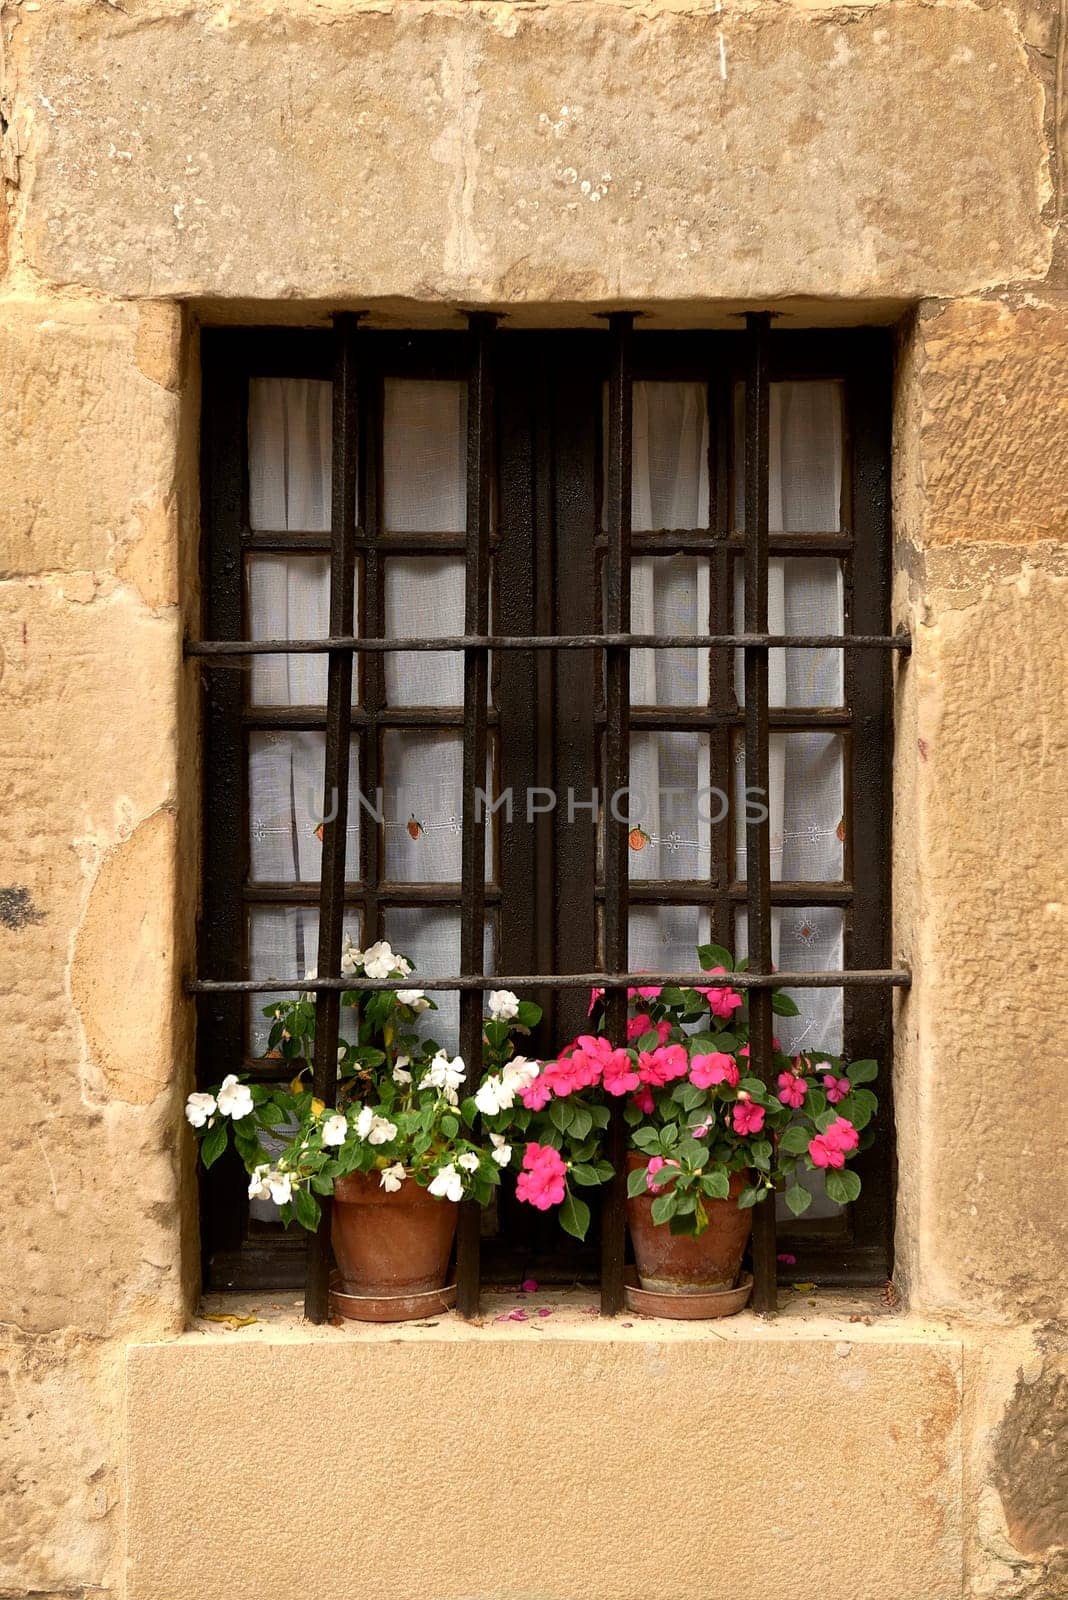 A window of a rustic house with railings and flowerpots,Coloured flowers, wrought iron, white curtains, stone, etc.